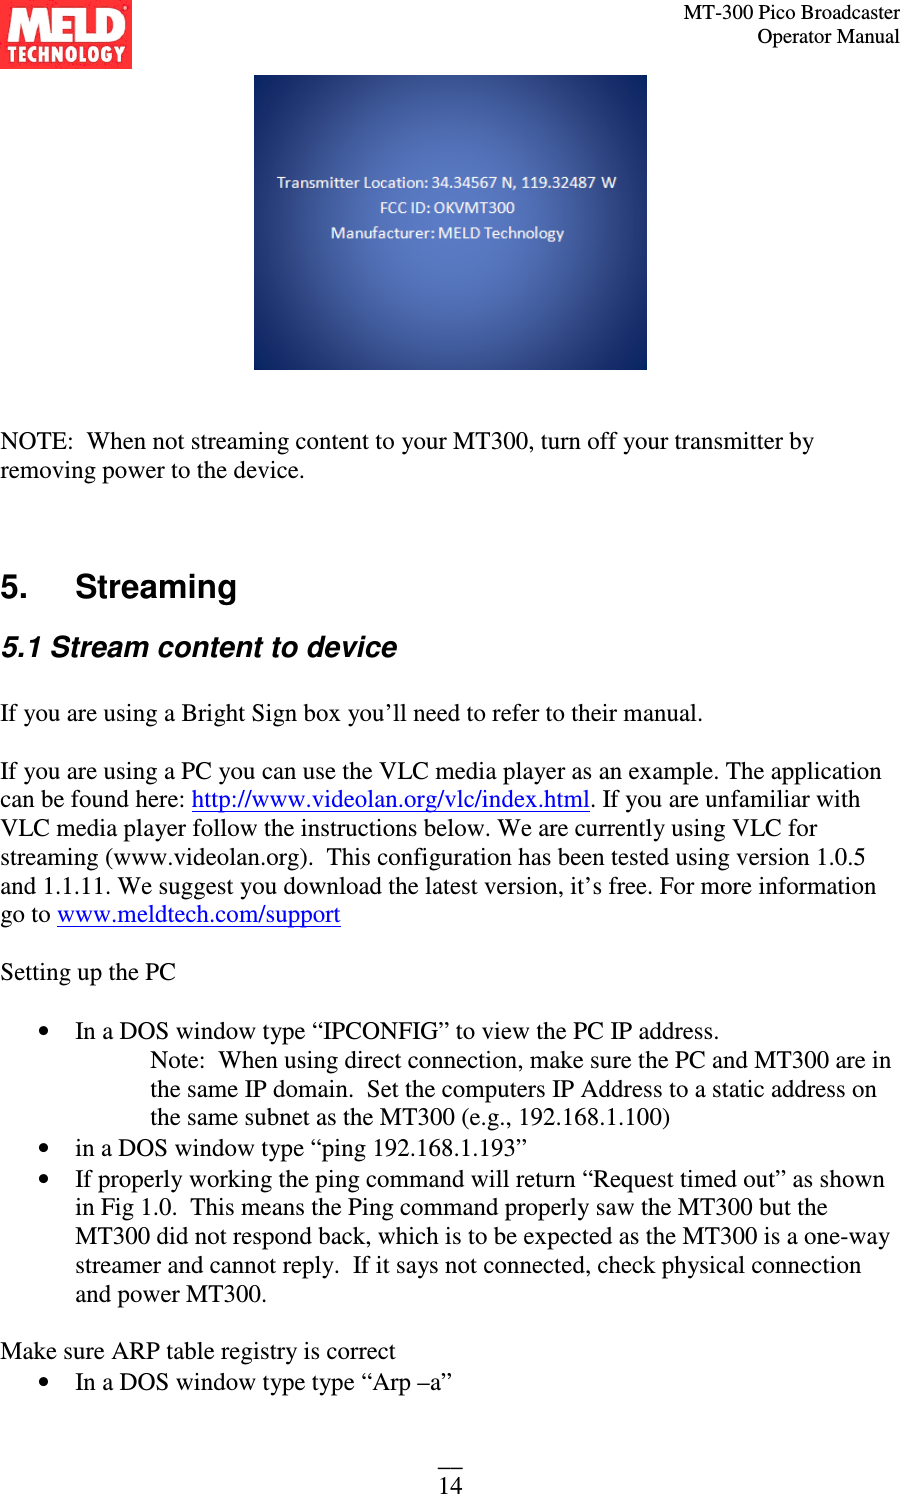 MT-300 Pico Broadcaster                                                                                                                                             Operator Manual __ 14    NOTE:  When not streaming content to your MT300, turn off your transmitter by removing power to the device.     5.   Streaming 5.1 Stream content to device  If you are using a Bright Sign box you’ll need to refer to their manual.  If you are using a PC you can use the VLC media player as an example. The application can be found here: http://www.videolan.org/vlc/index.html. If you are unfamiliar with VLC media player follow the instructions below. We are currently using VLC for streaming (www.videolan.org).  This configuration has been tested using version 1.0.5 and 1.1.11. We suggest you download the latest version, it’s free. For more information go to www.meldtech.com/support  Setting up the PC  • In a DOS window type “IPCONFIG” to view the PC IP address.  Note:  When using direct connection, make sure the PC and MT300 are in the same IP domain.  Set the computers IP Address to a static address on the same subnet as the MT300 (e.g., 192.168.1.100) • in a DOS window type “ping 192.168.1.193” • If properly working the ping command will return “Request timed out” as shown in Fig 1.0.  This means the Ping command properly saw the MT300 but the MT300 did not respond back, which is to be expected as the MT300 is a one-way streamer and cannot reply.  If it says not connected, check physical connection and power MT300.    Make sure ARP table registry is correct • In a DOS window type type “Arp –a” 